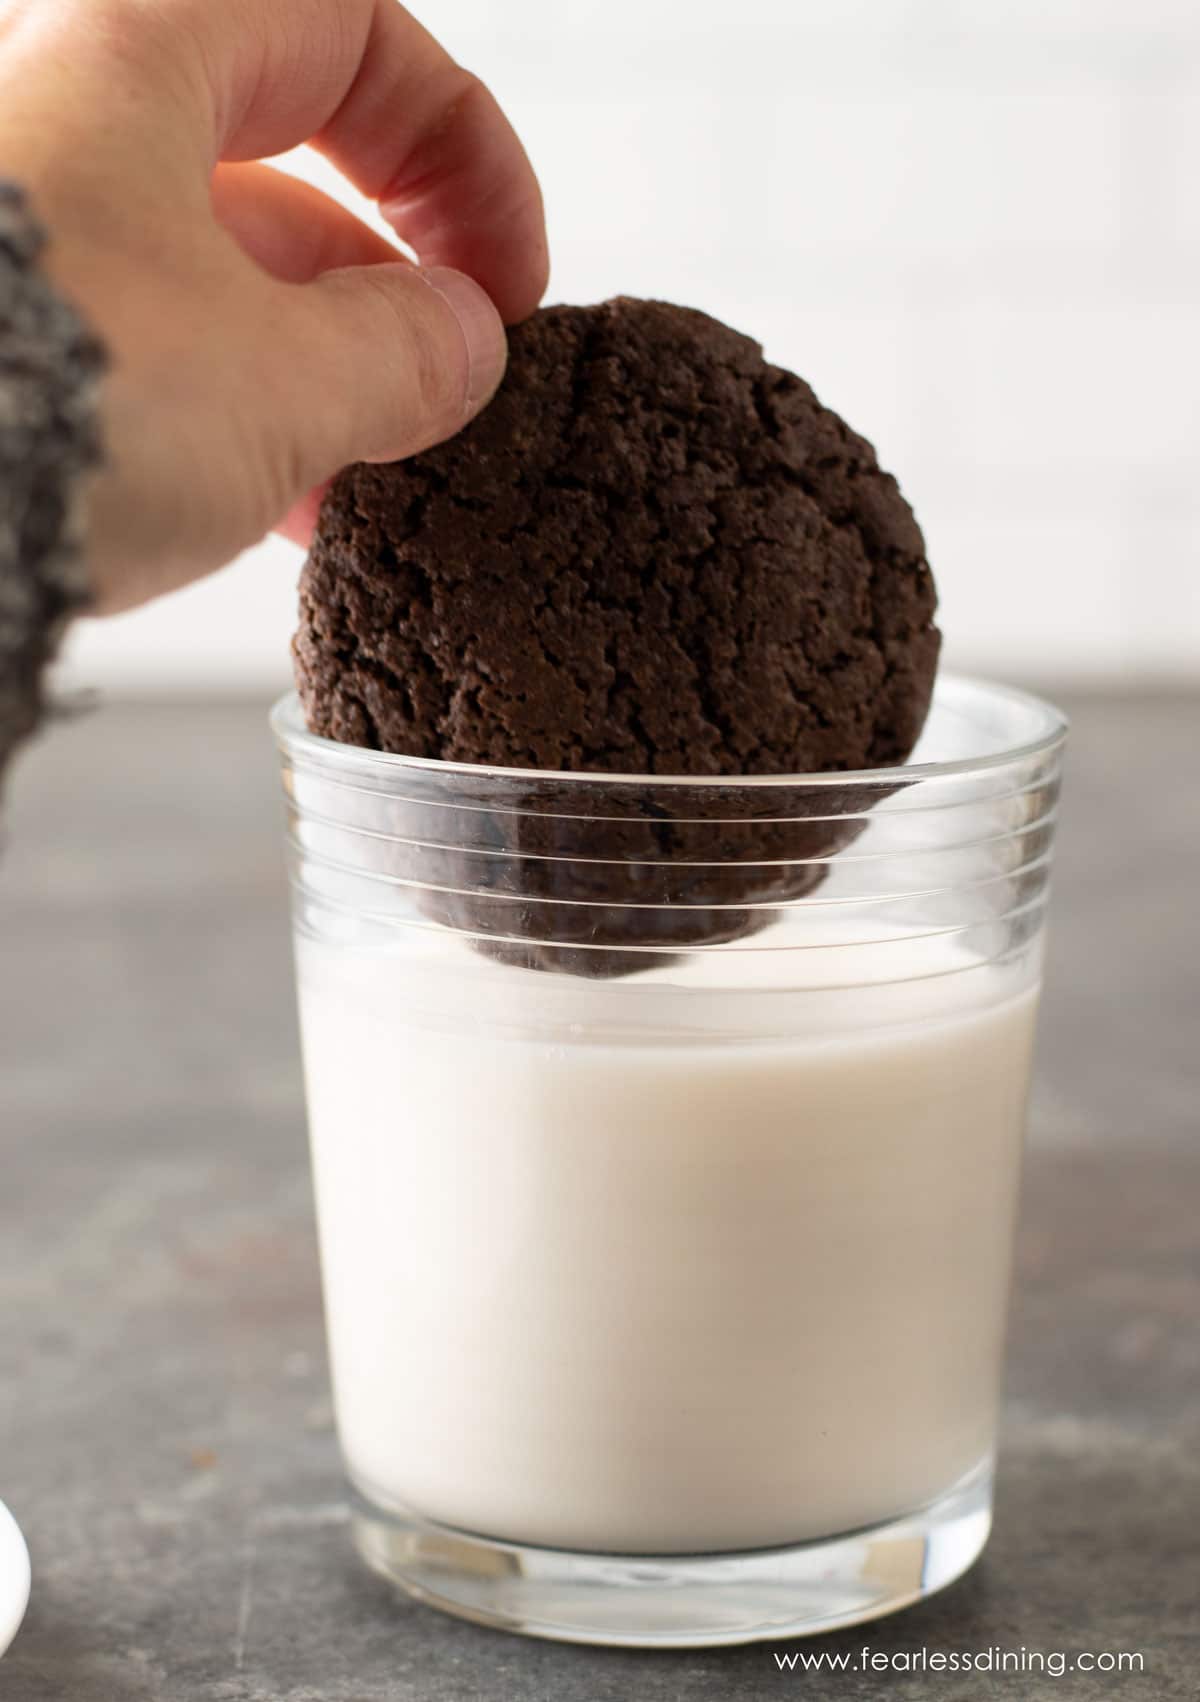 Dipping a chocolate cookie in a glass of milk.